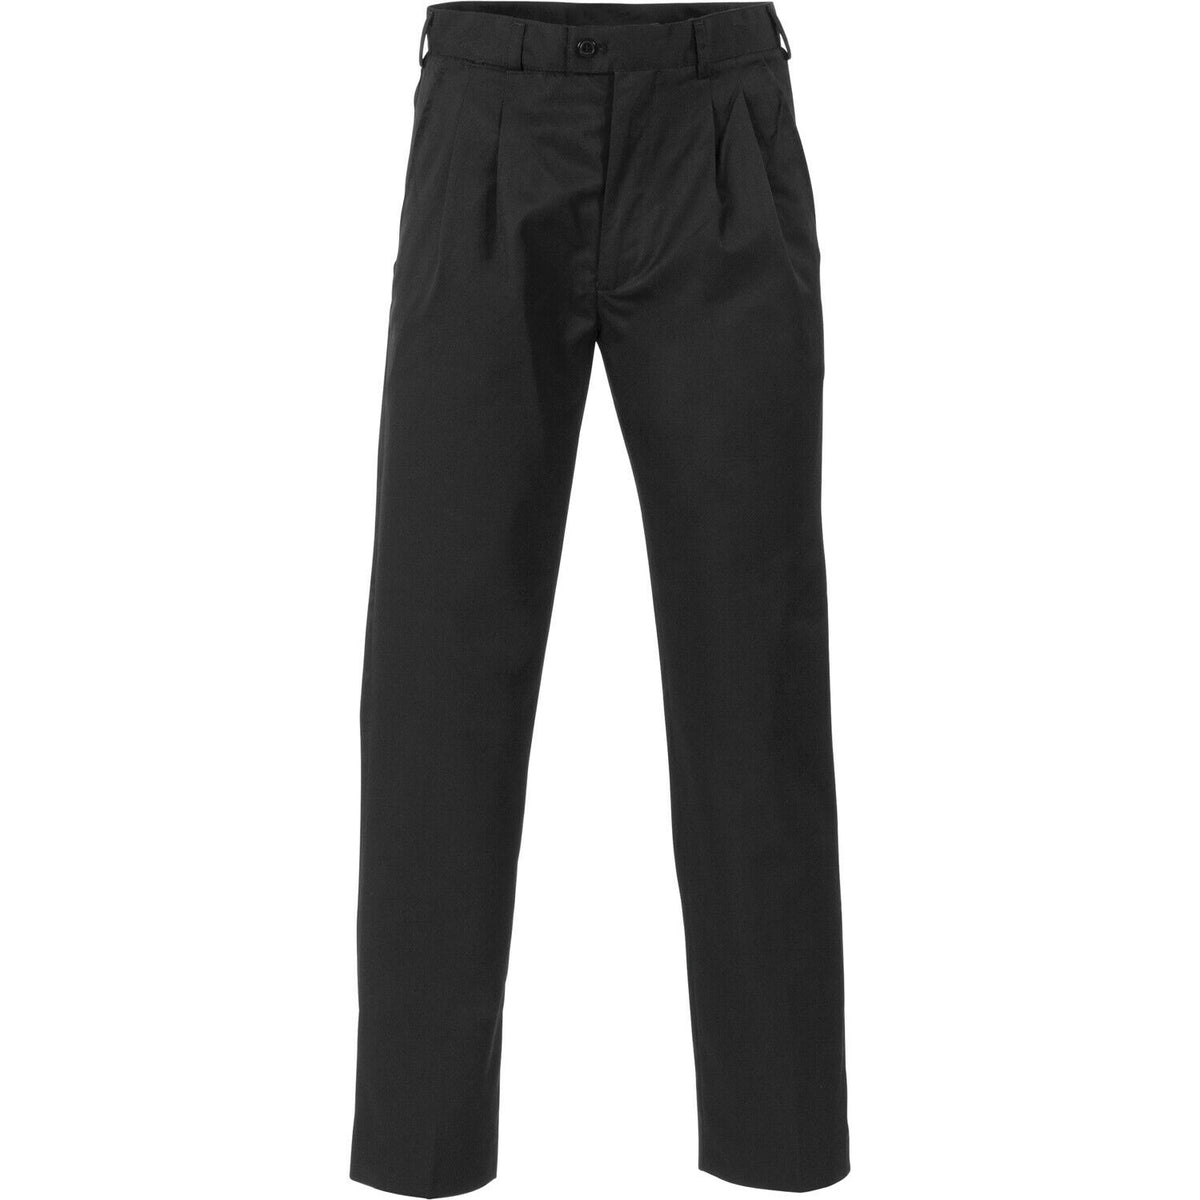 DNC Workwear Mens Mens P/V Pleat Front Pants Comfortable Work Comfort 4502-Collins Clothing Co